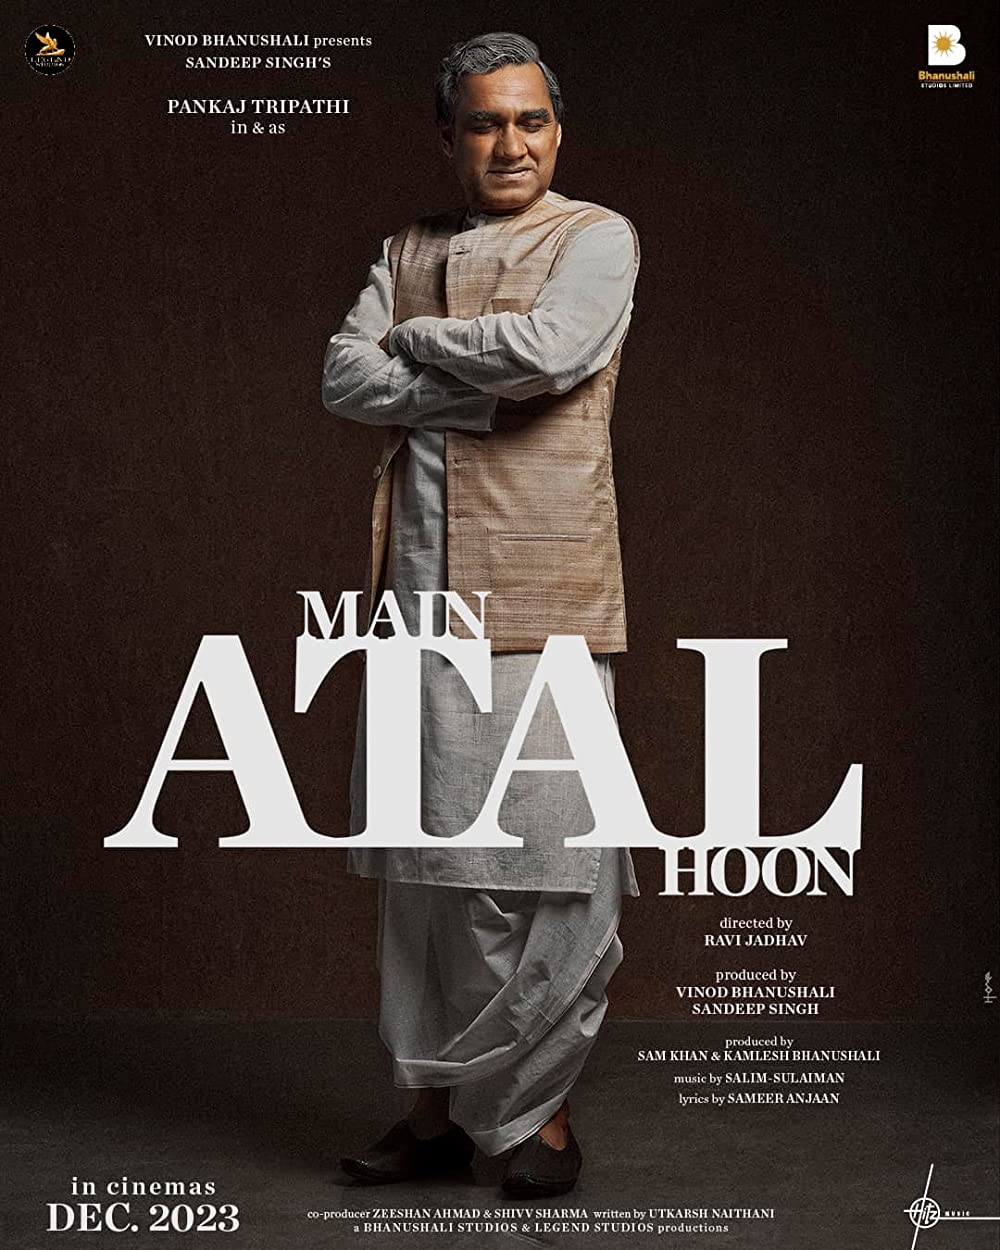 Main Atal Hoon Movie (2023) Cast, Release Date, Story, Budget, Collection, Poster, Trailer, Review